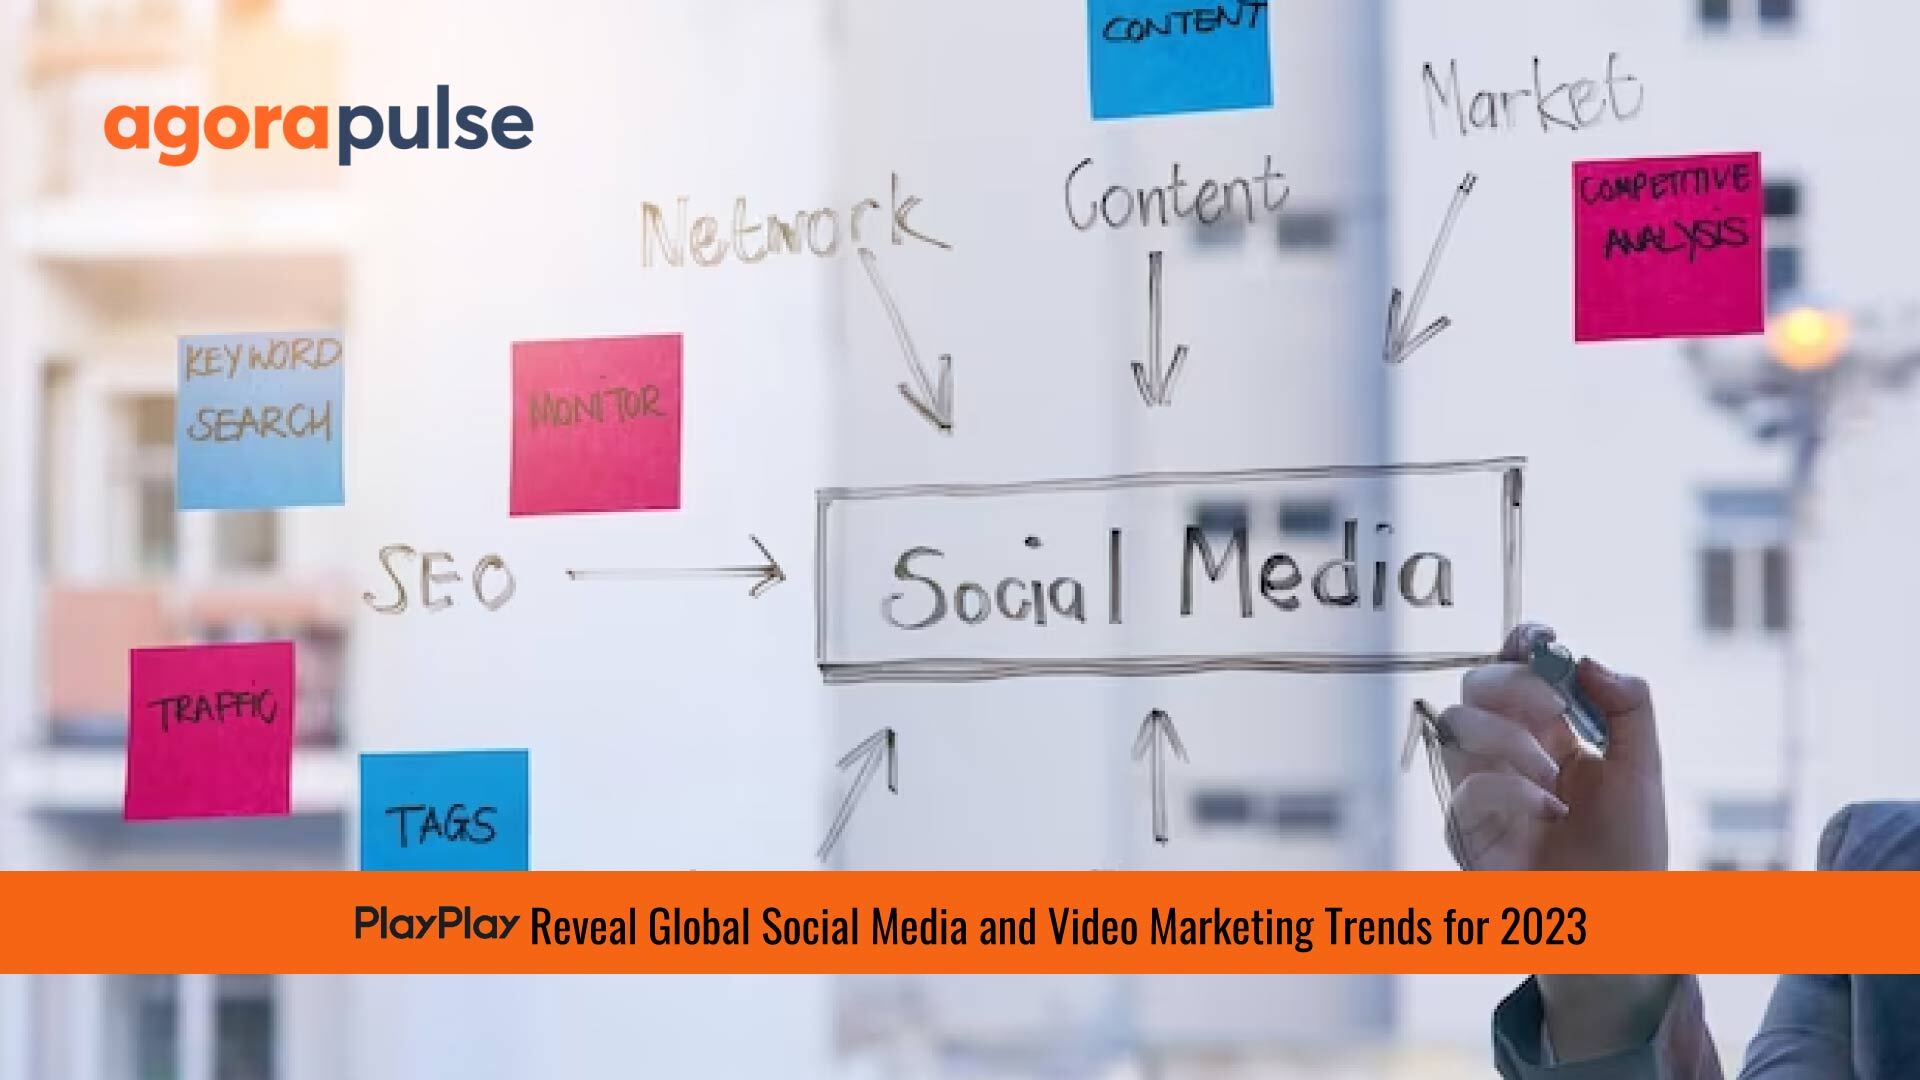 Agorapulse and PlayPlay Reveal Global Social Media and Video Marketing Trends for 2023